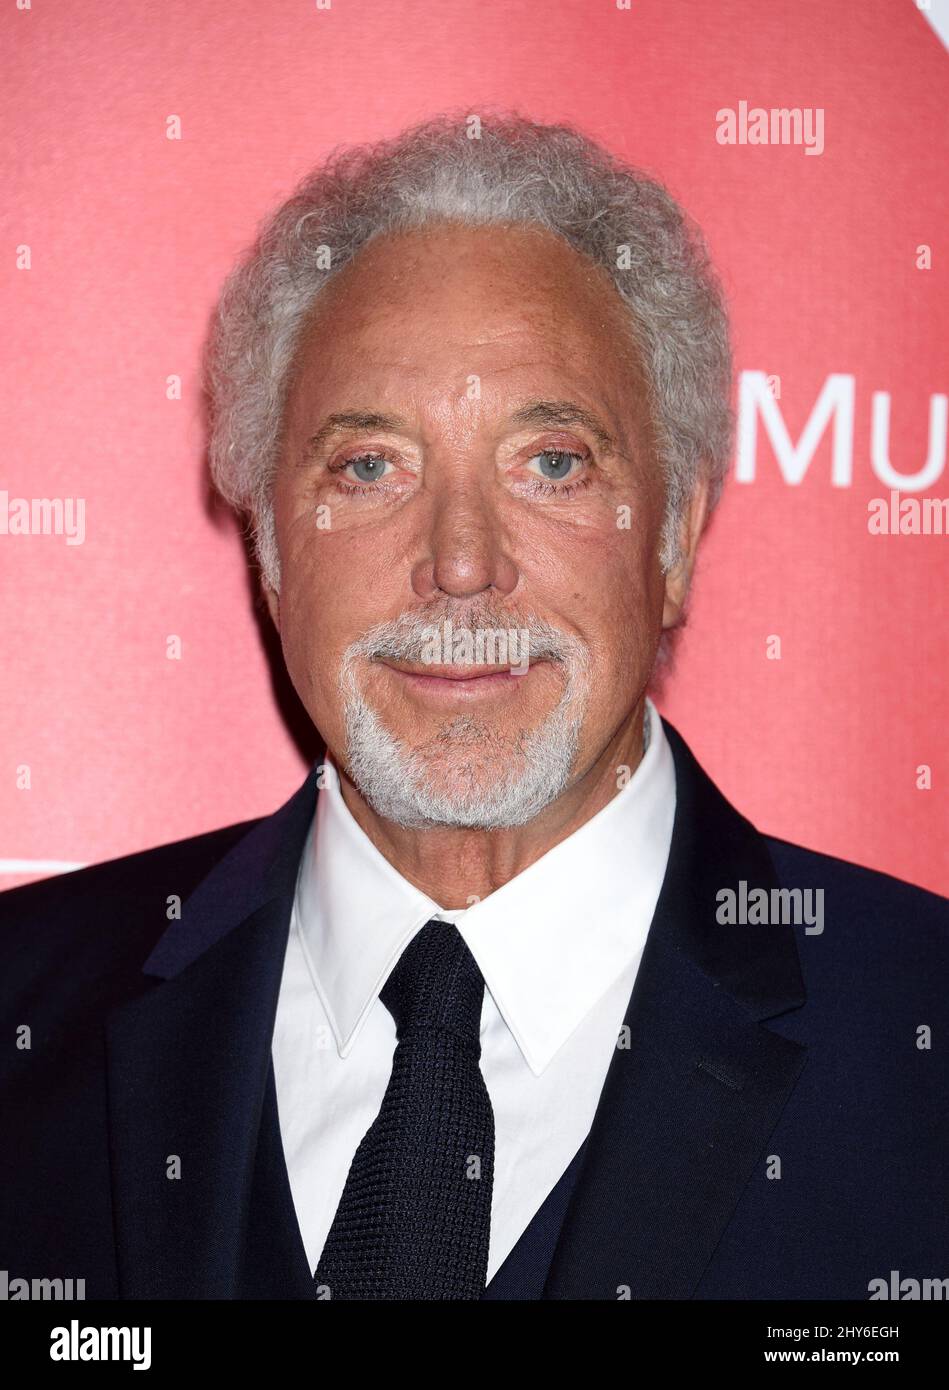 Tom Jones attending the 2015 MusiCares Person of the Year Gala honoring Bob Dylan, at the Los Angeles Convention Center in Los Angeles, California. Stock Photo